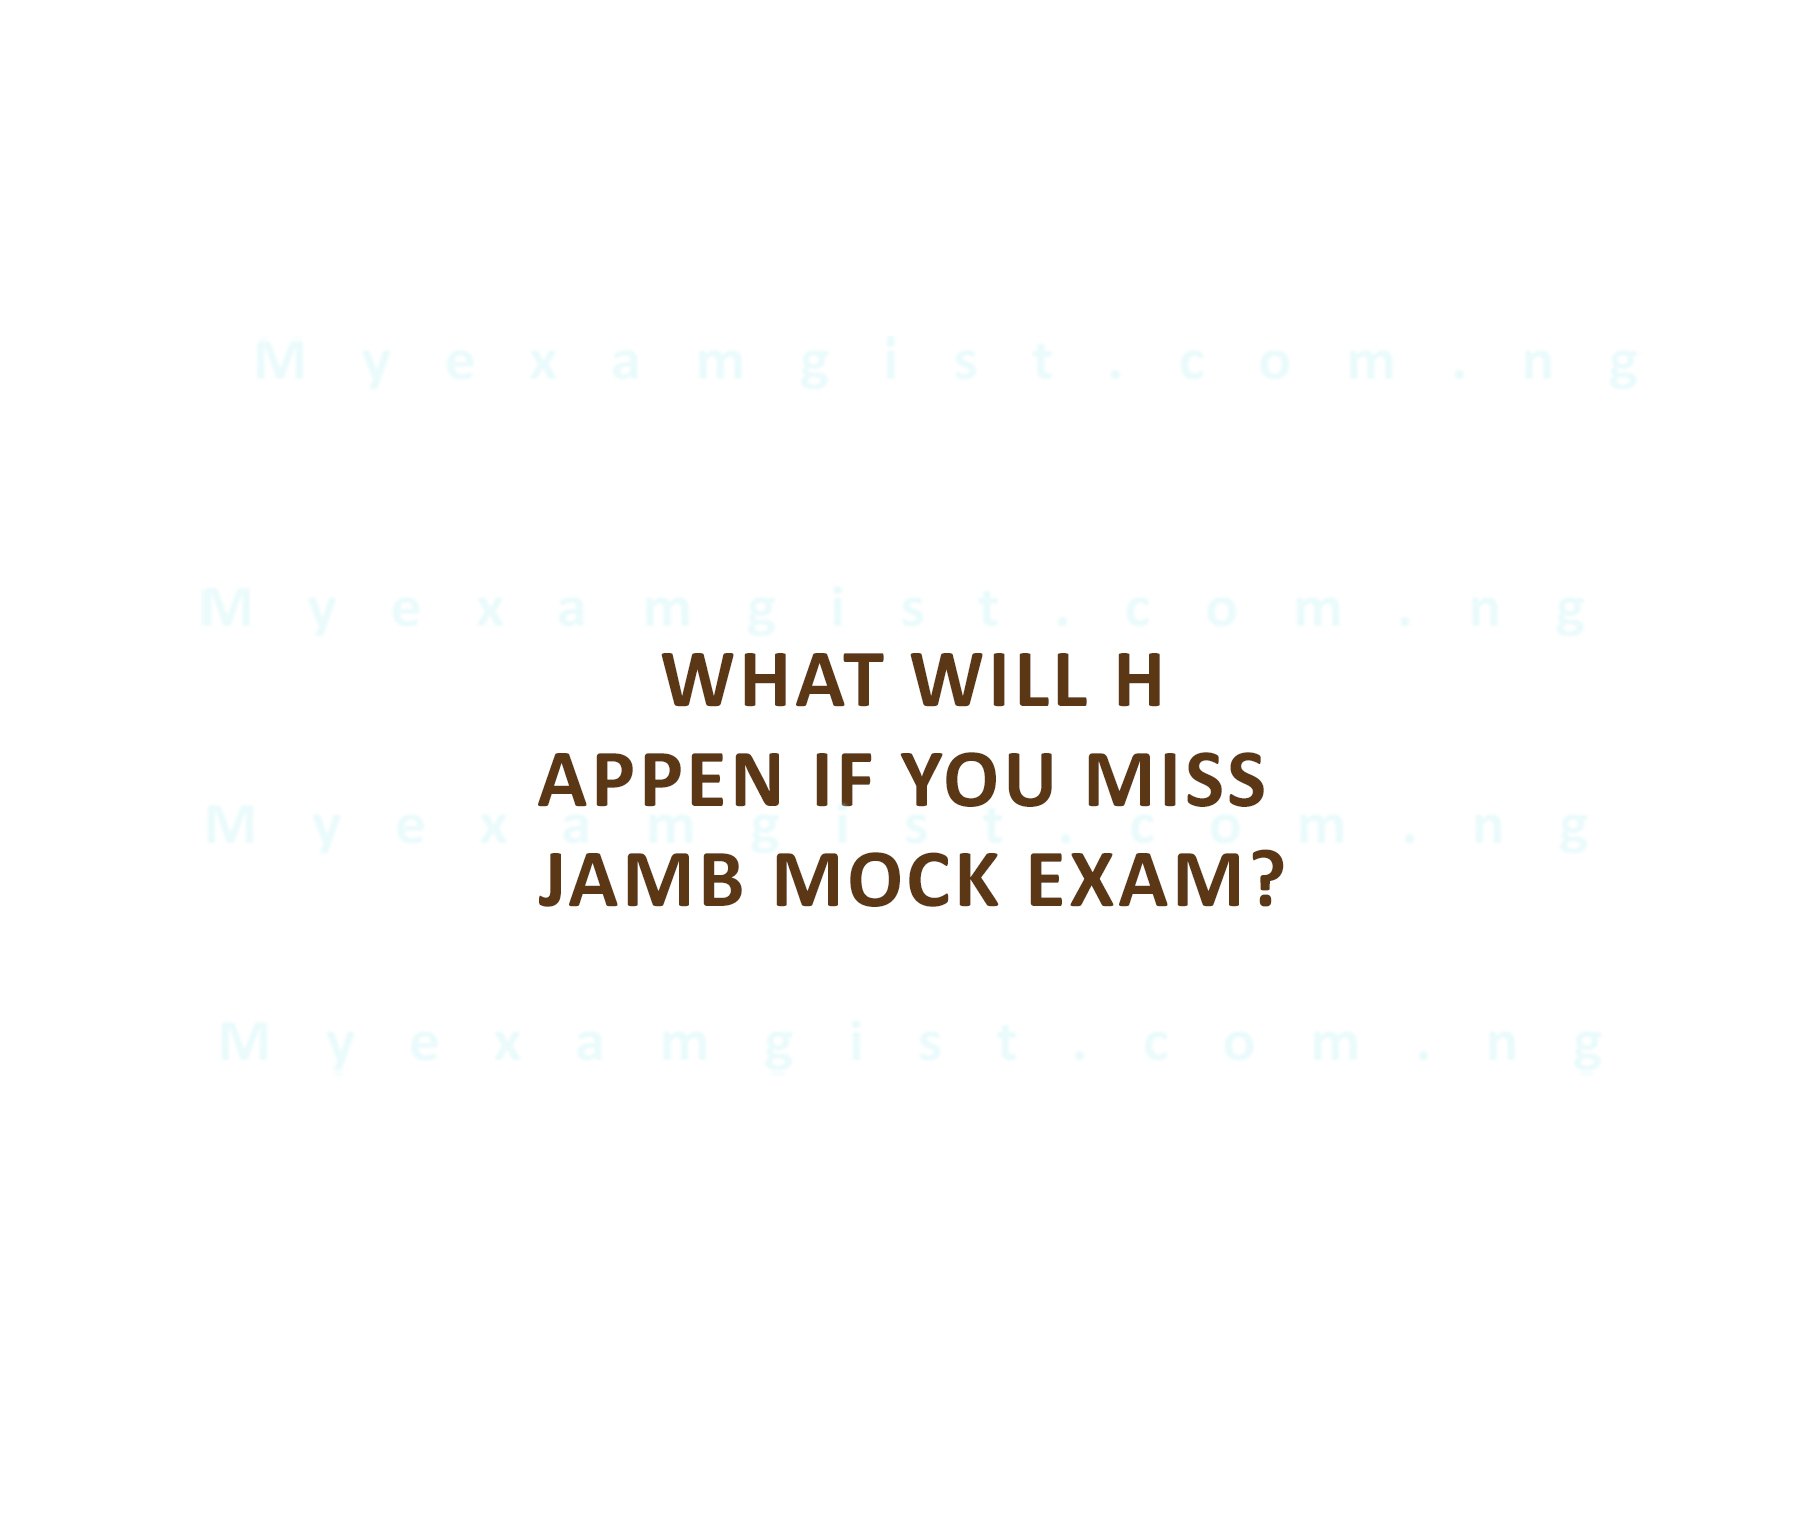 What will happen if you miss JAMB mock exam?